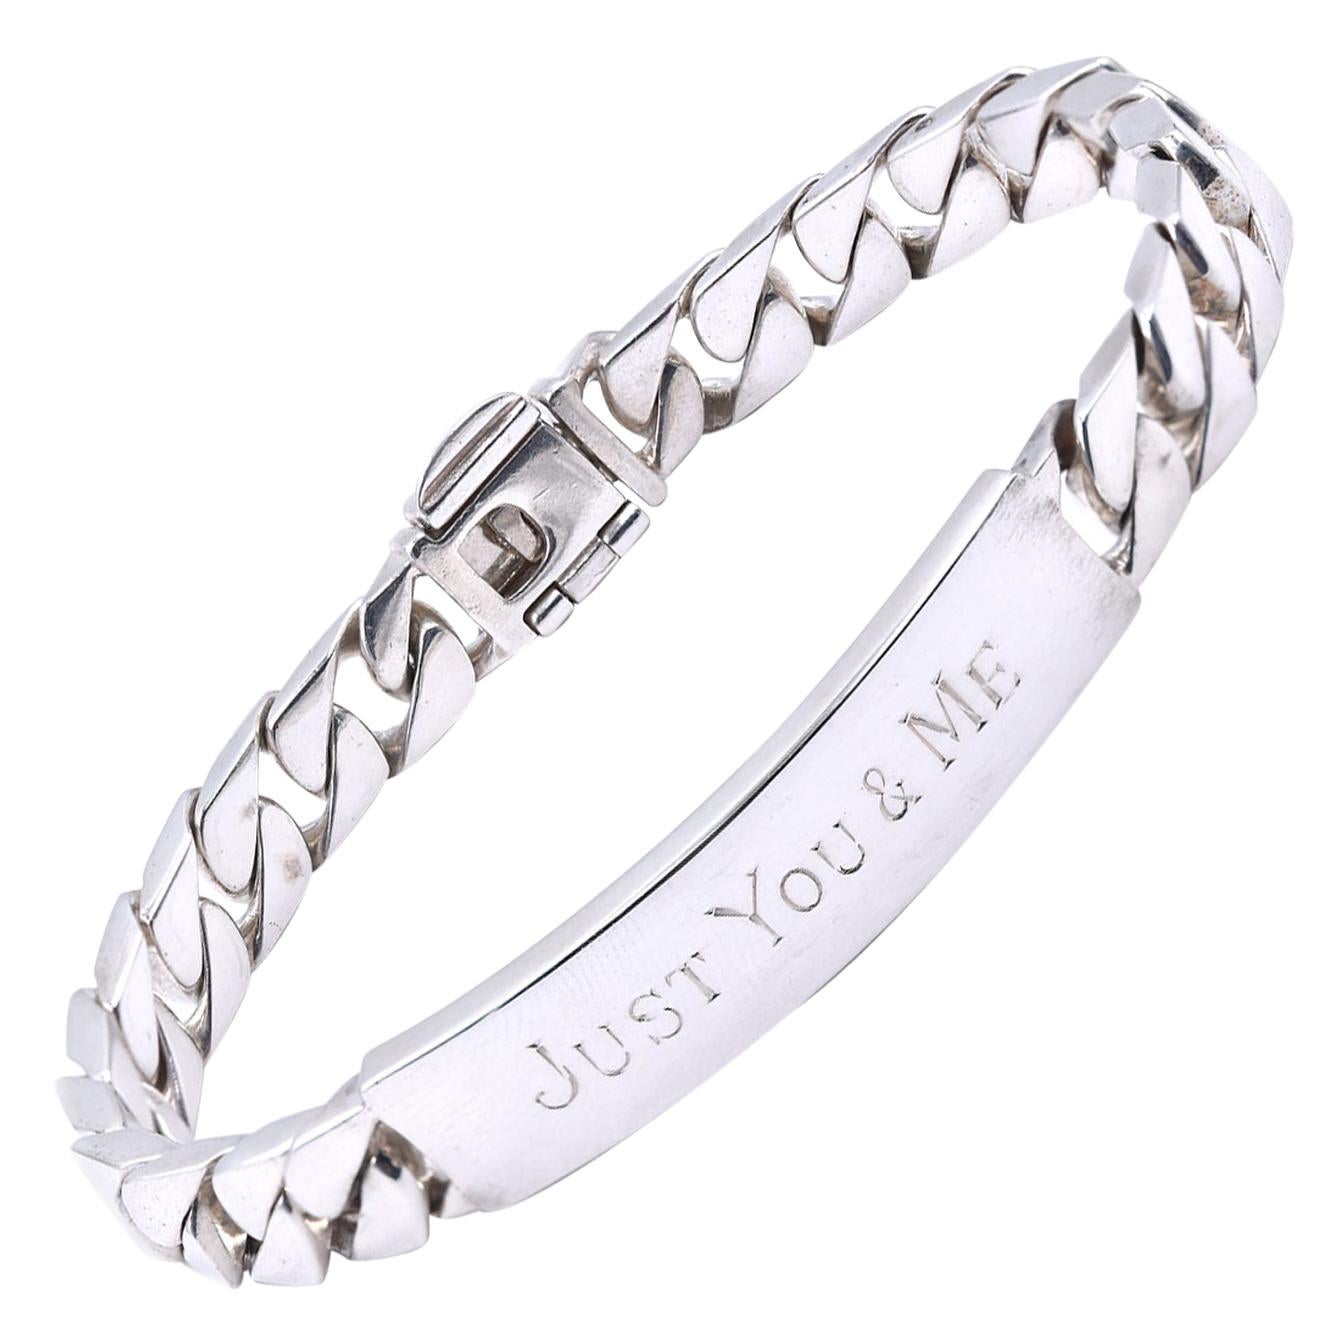 Tiffany & Co. Sterling Silver ID Bracelet Engraved “Just You & Me”